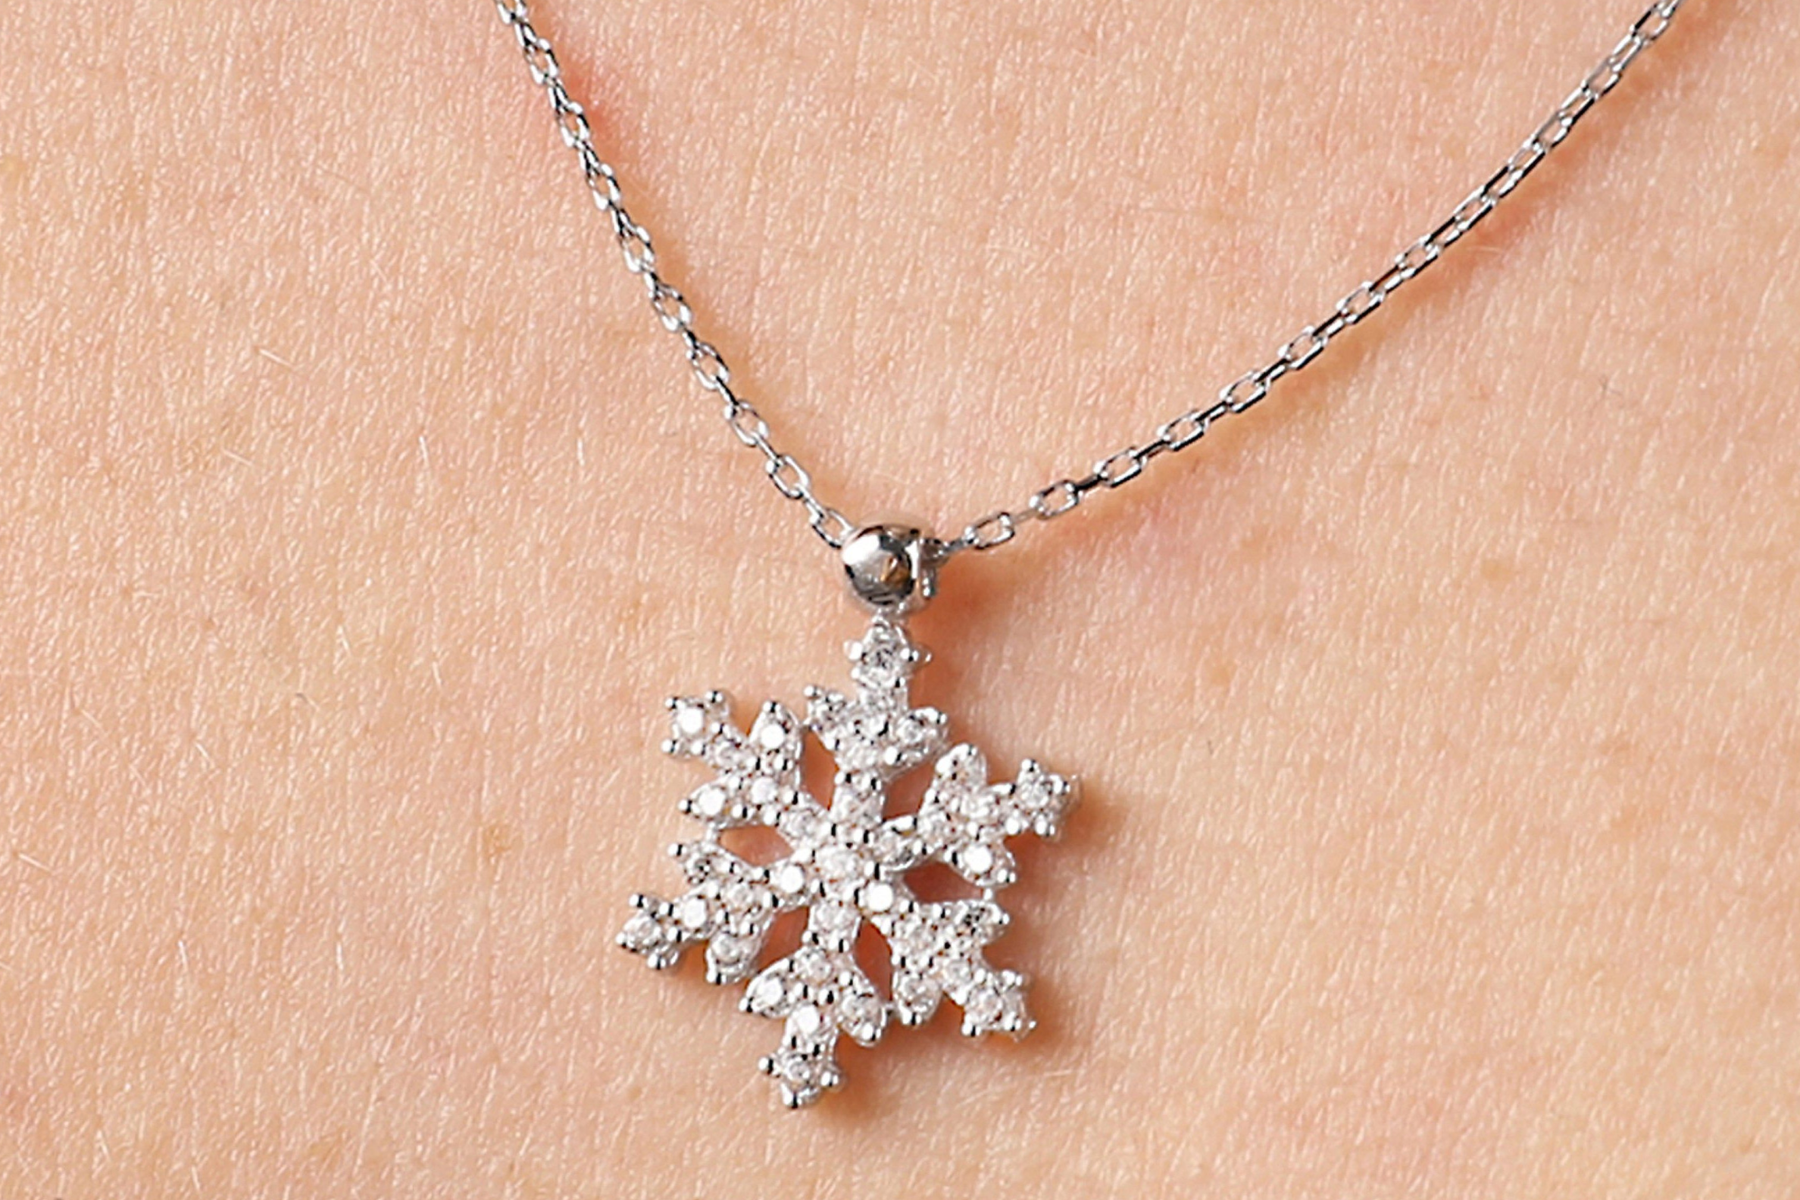 A close-up photograph of a snowflake necklace resting on a person's skin